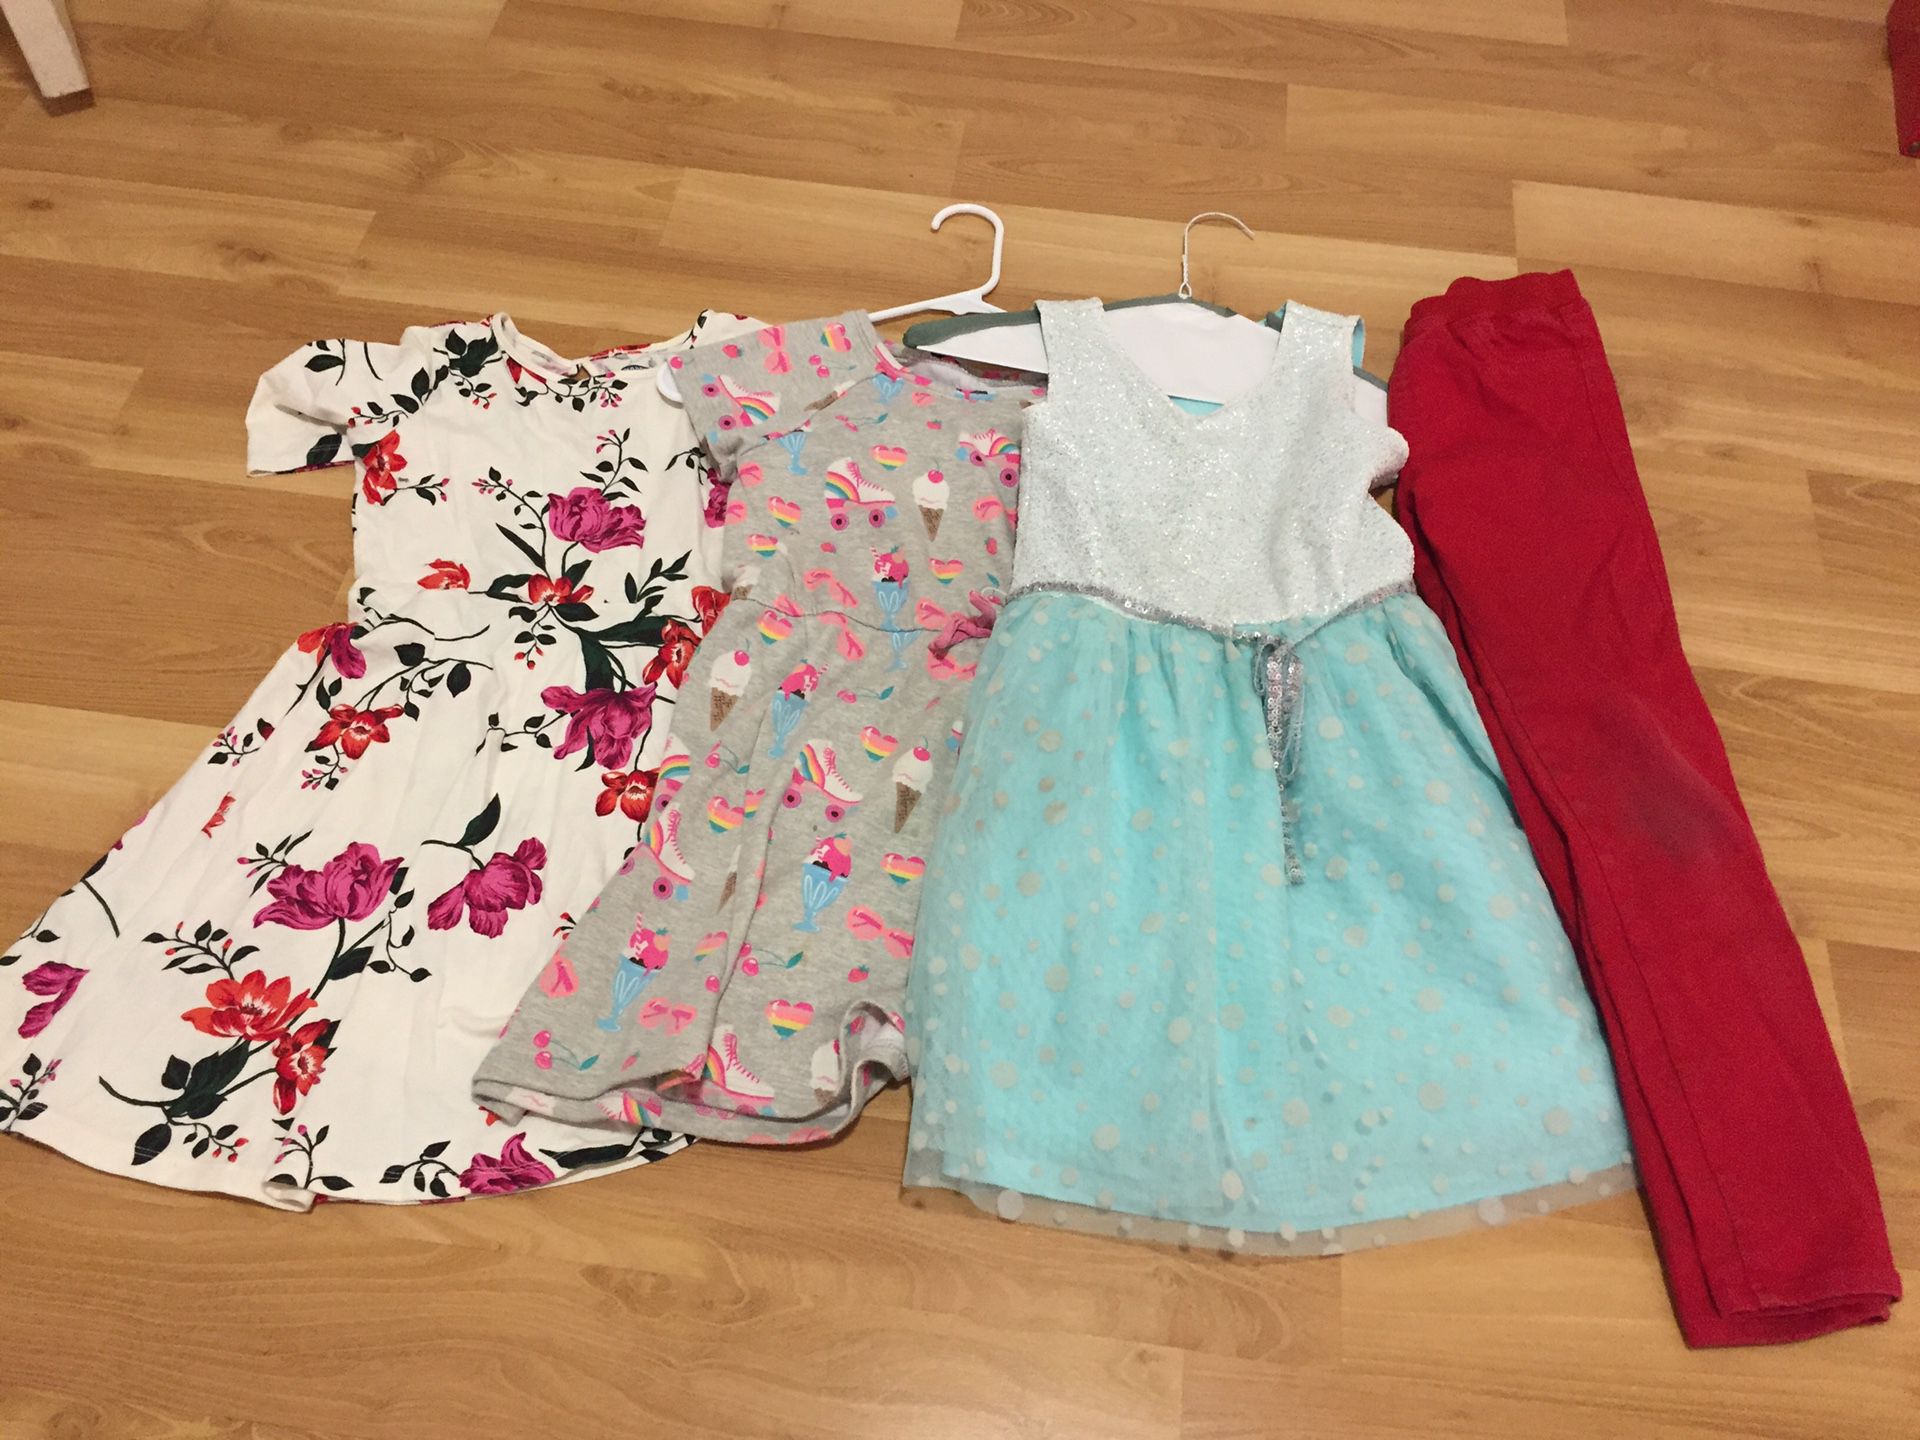 Girl’s clothes and dresses (size 5-8)